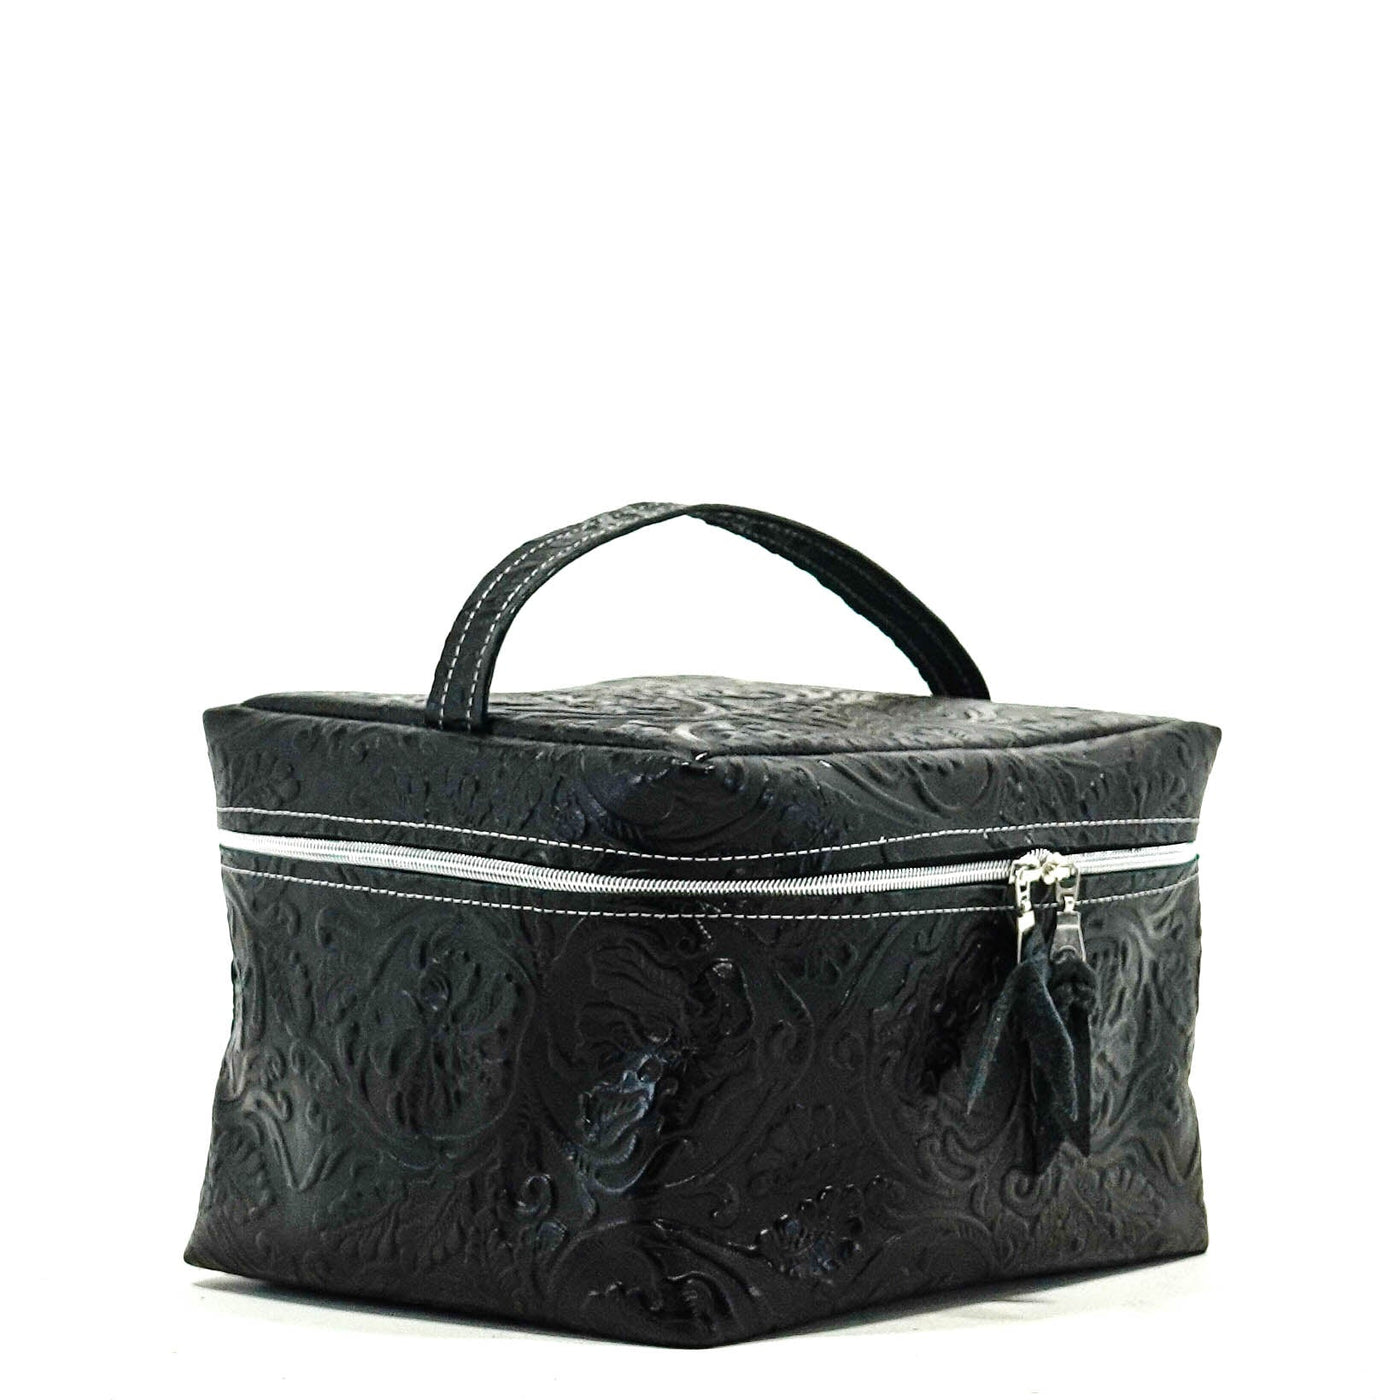 Train Station - All Embossed w/ Onyx Tool-Train Station-Western-Cowhide-Bags-Handmade-Products-Gifts-Dancing Cactus Designs